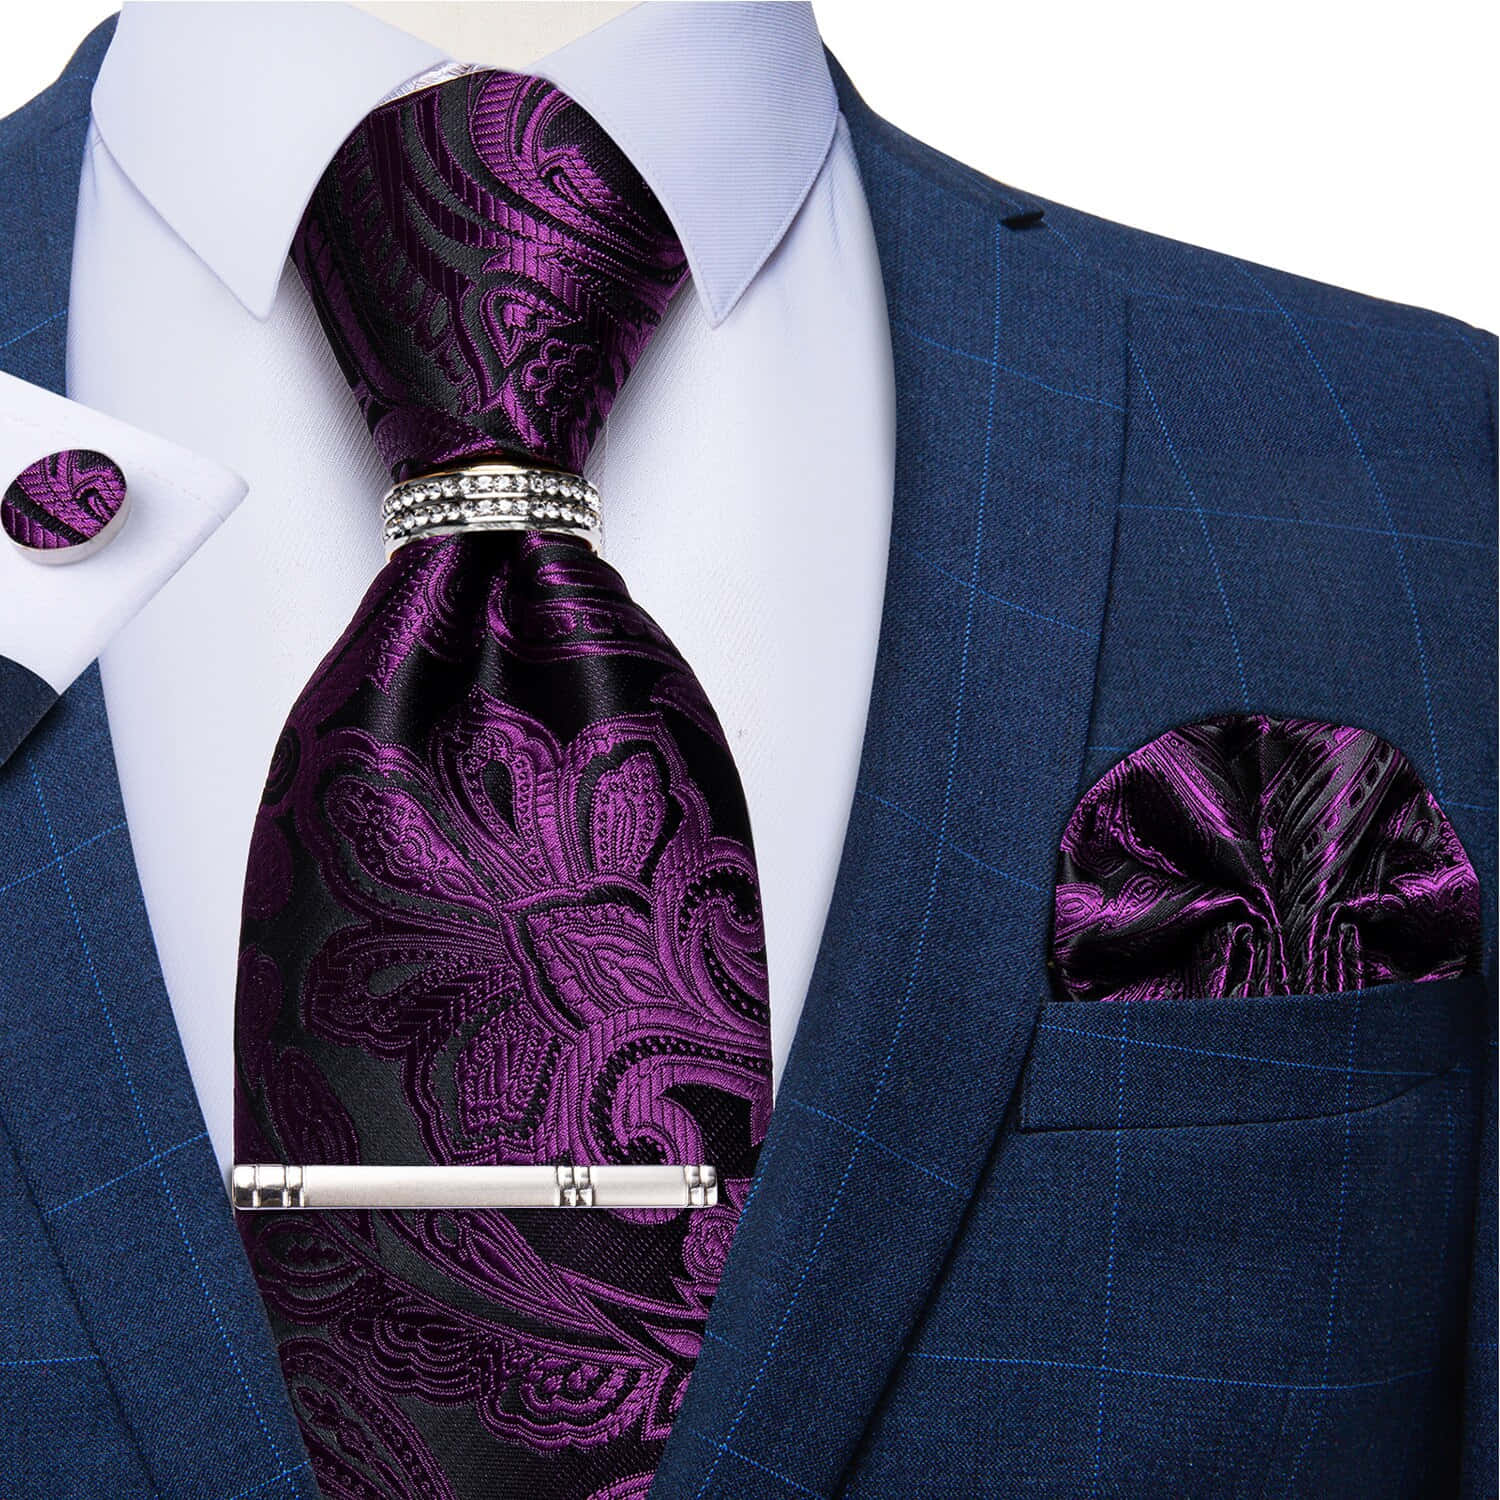 Professional and Stylish in a Purple Tie Wallpaper